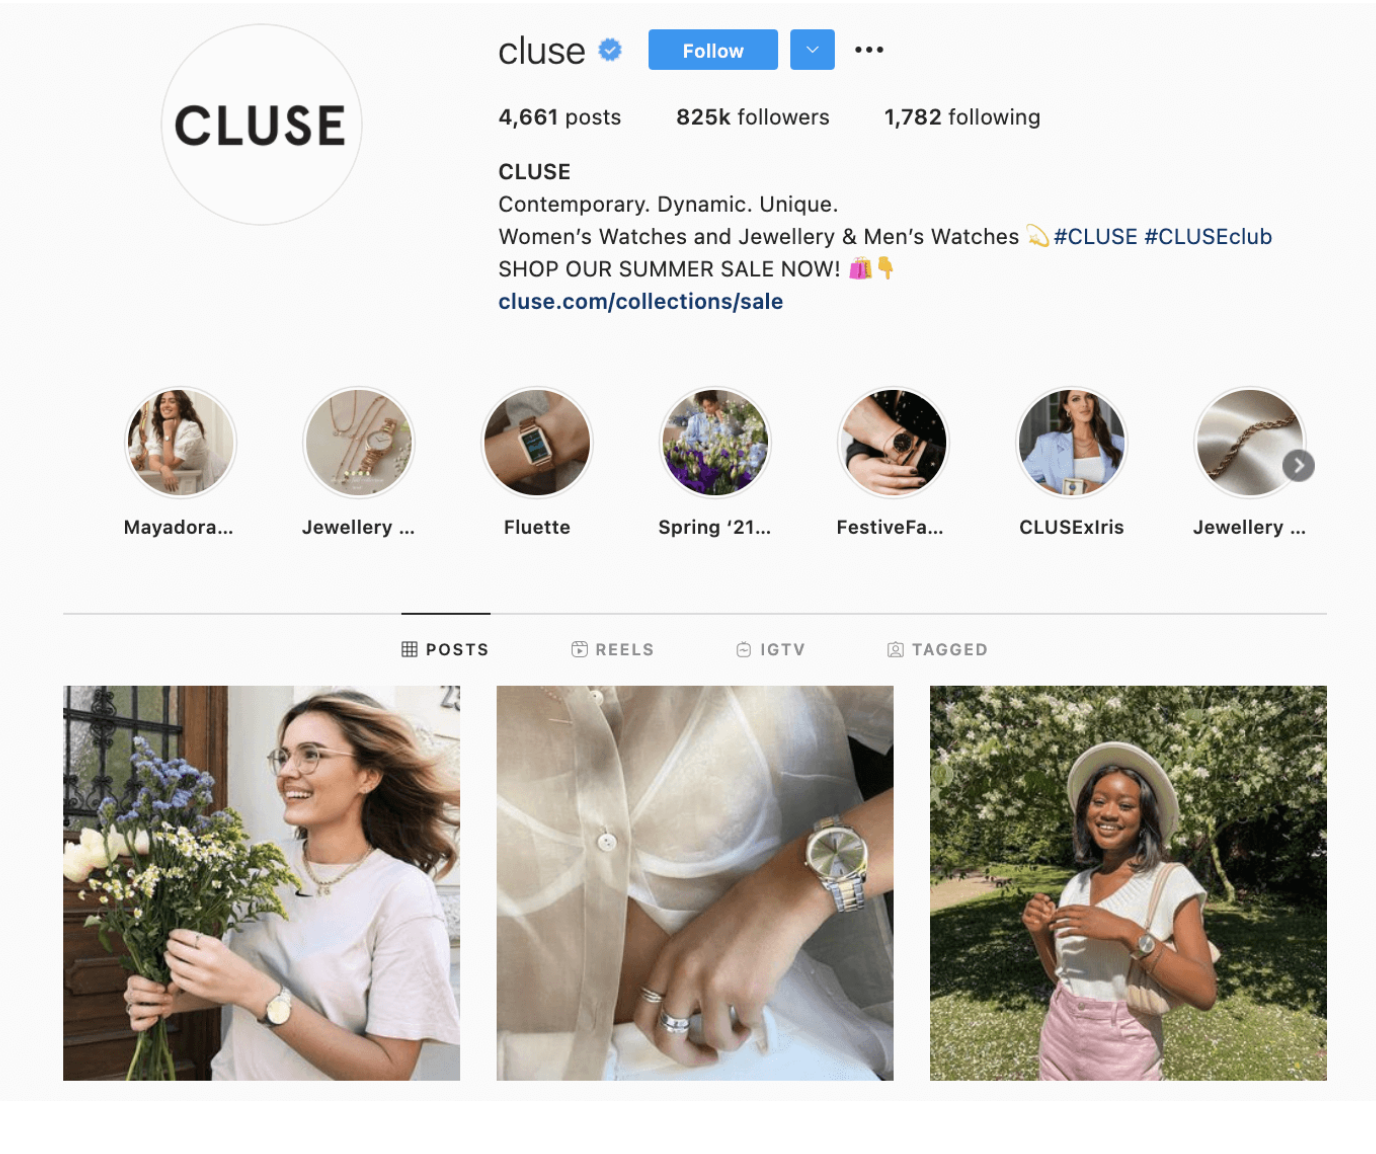 CLUSE's Instagram account showcasing a variety of women's and men's watches.